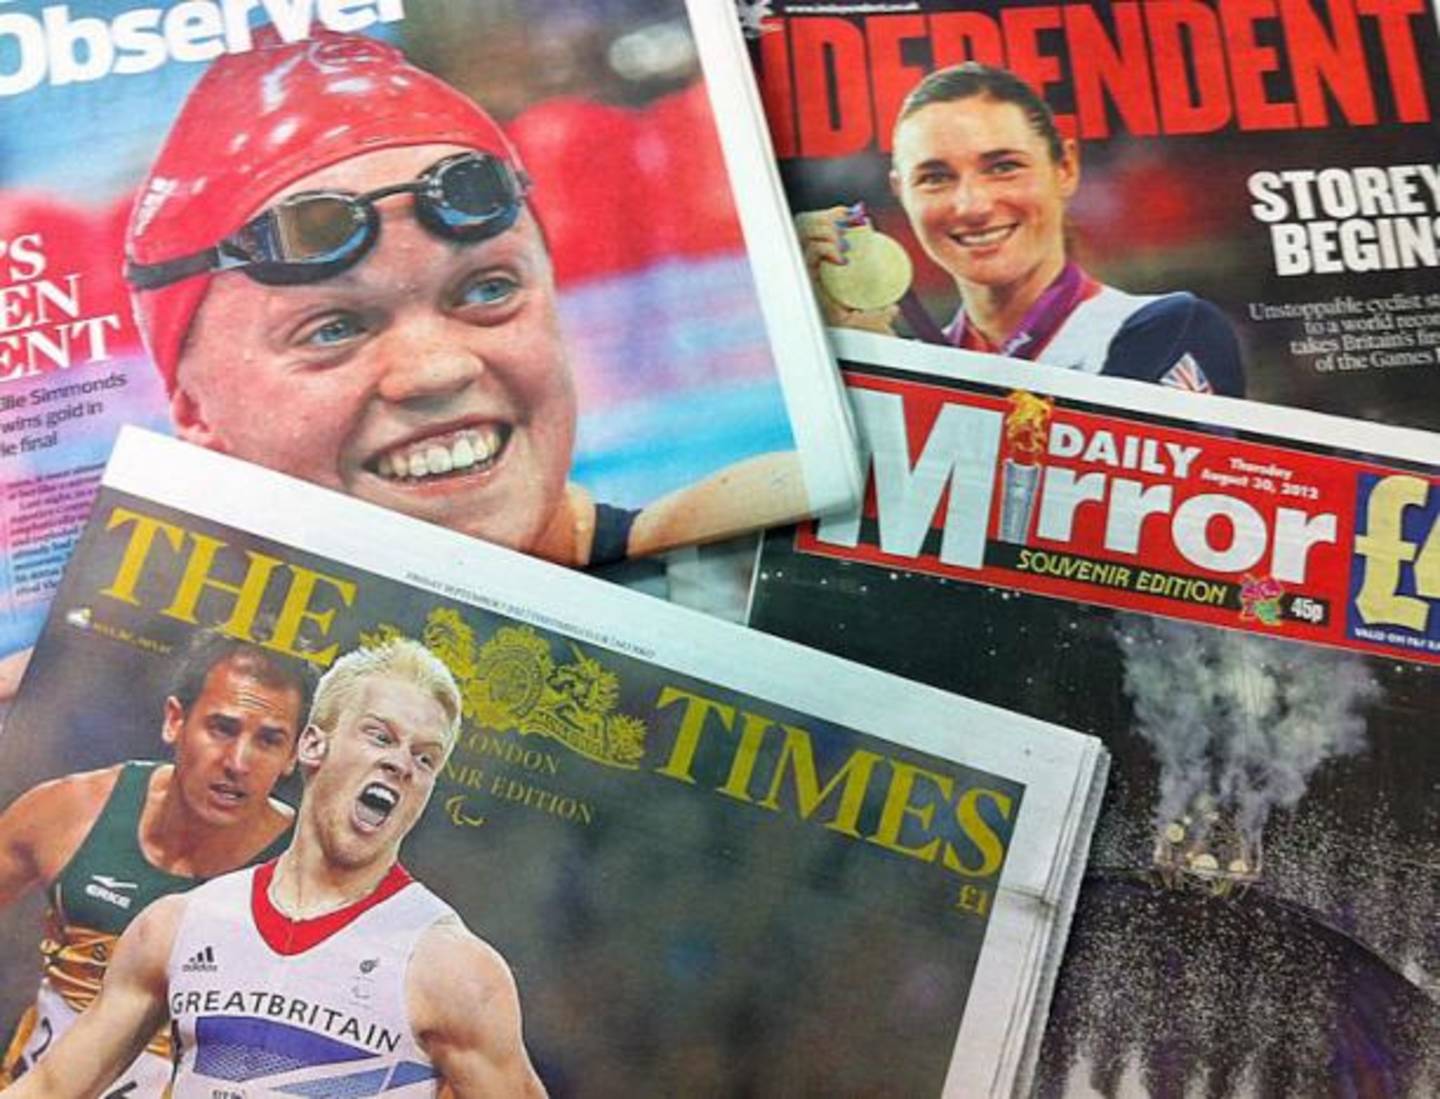 2012 Paralympics coverage on newspaper front pages